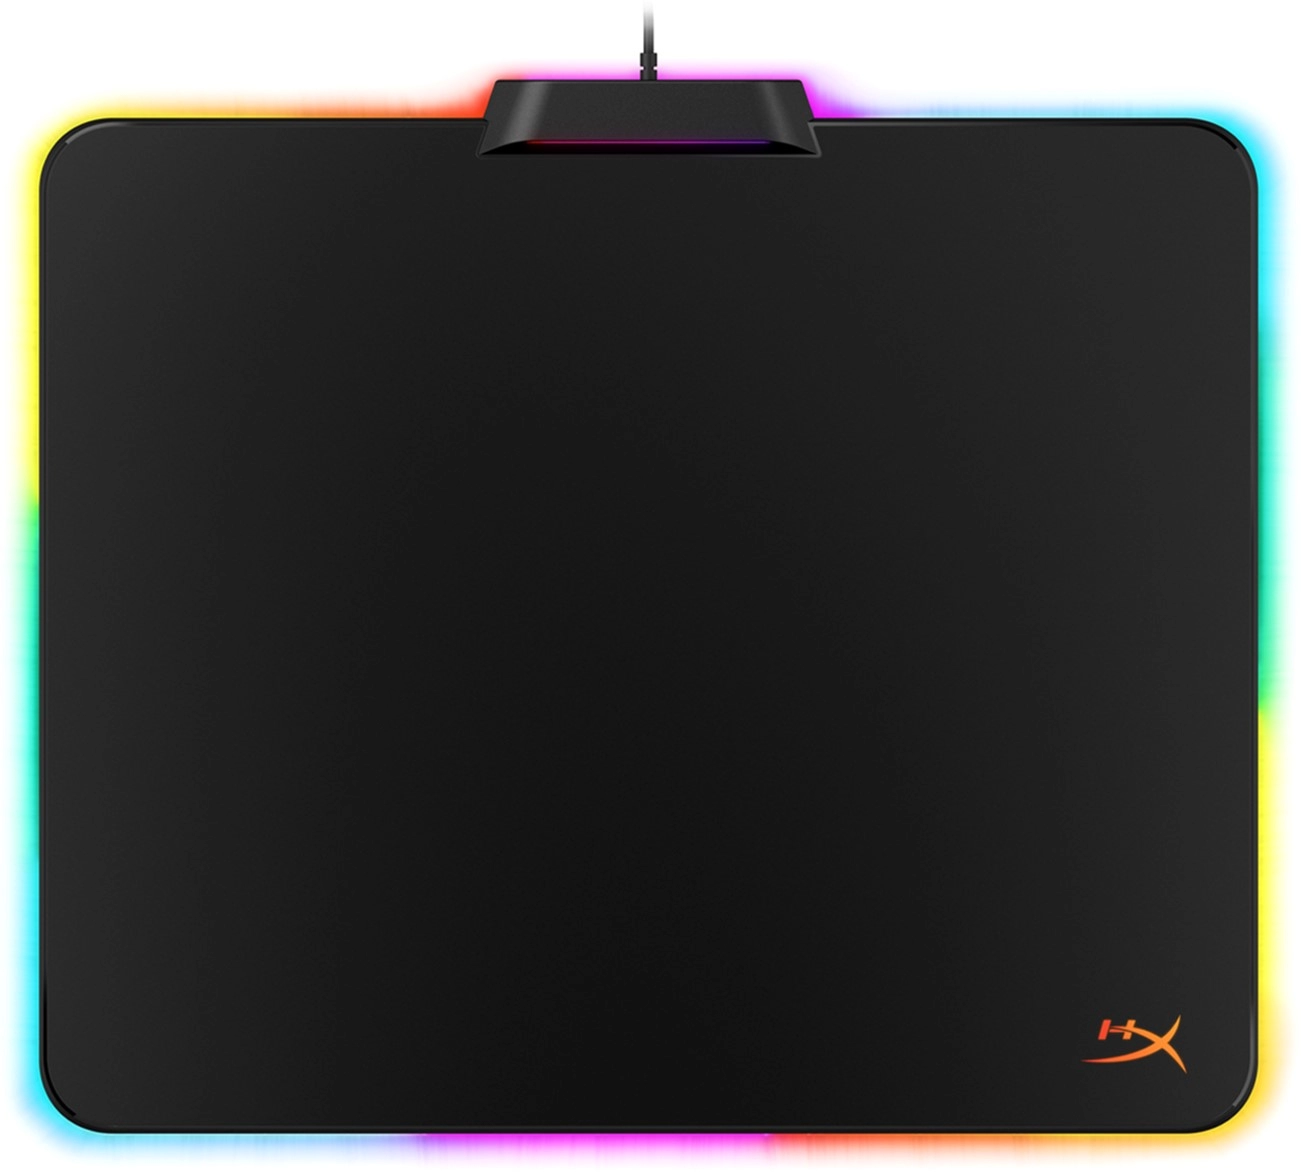 HYPERX FURY Ultra Gaming Mouse Pad with RGB 360°, Size 360mm x 300mm, Plastic, Stable, Anti-slip rubber base, Compatible with optical or laser mice, Micro-textured hard surface for performance and speed, USB cable 1.8m, Black